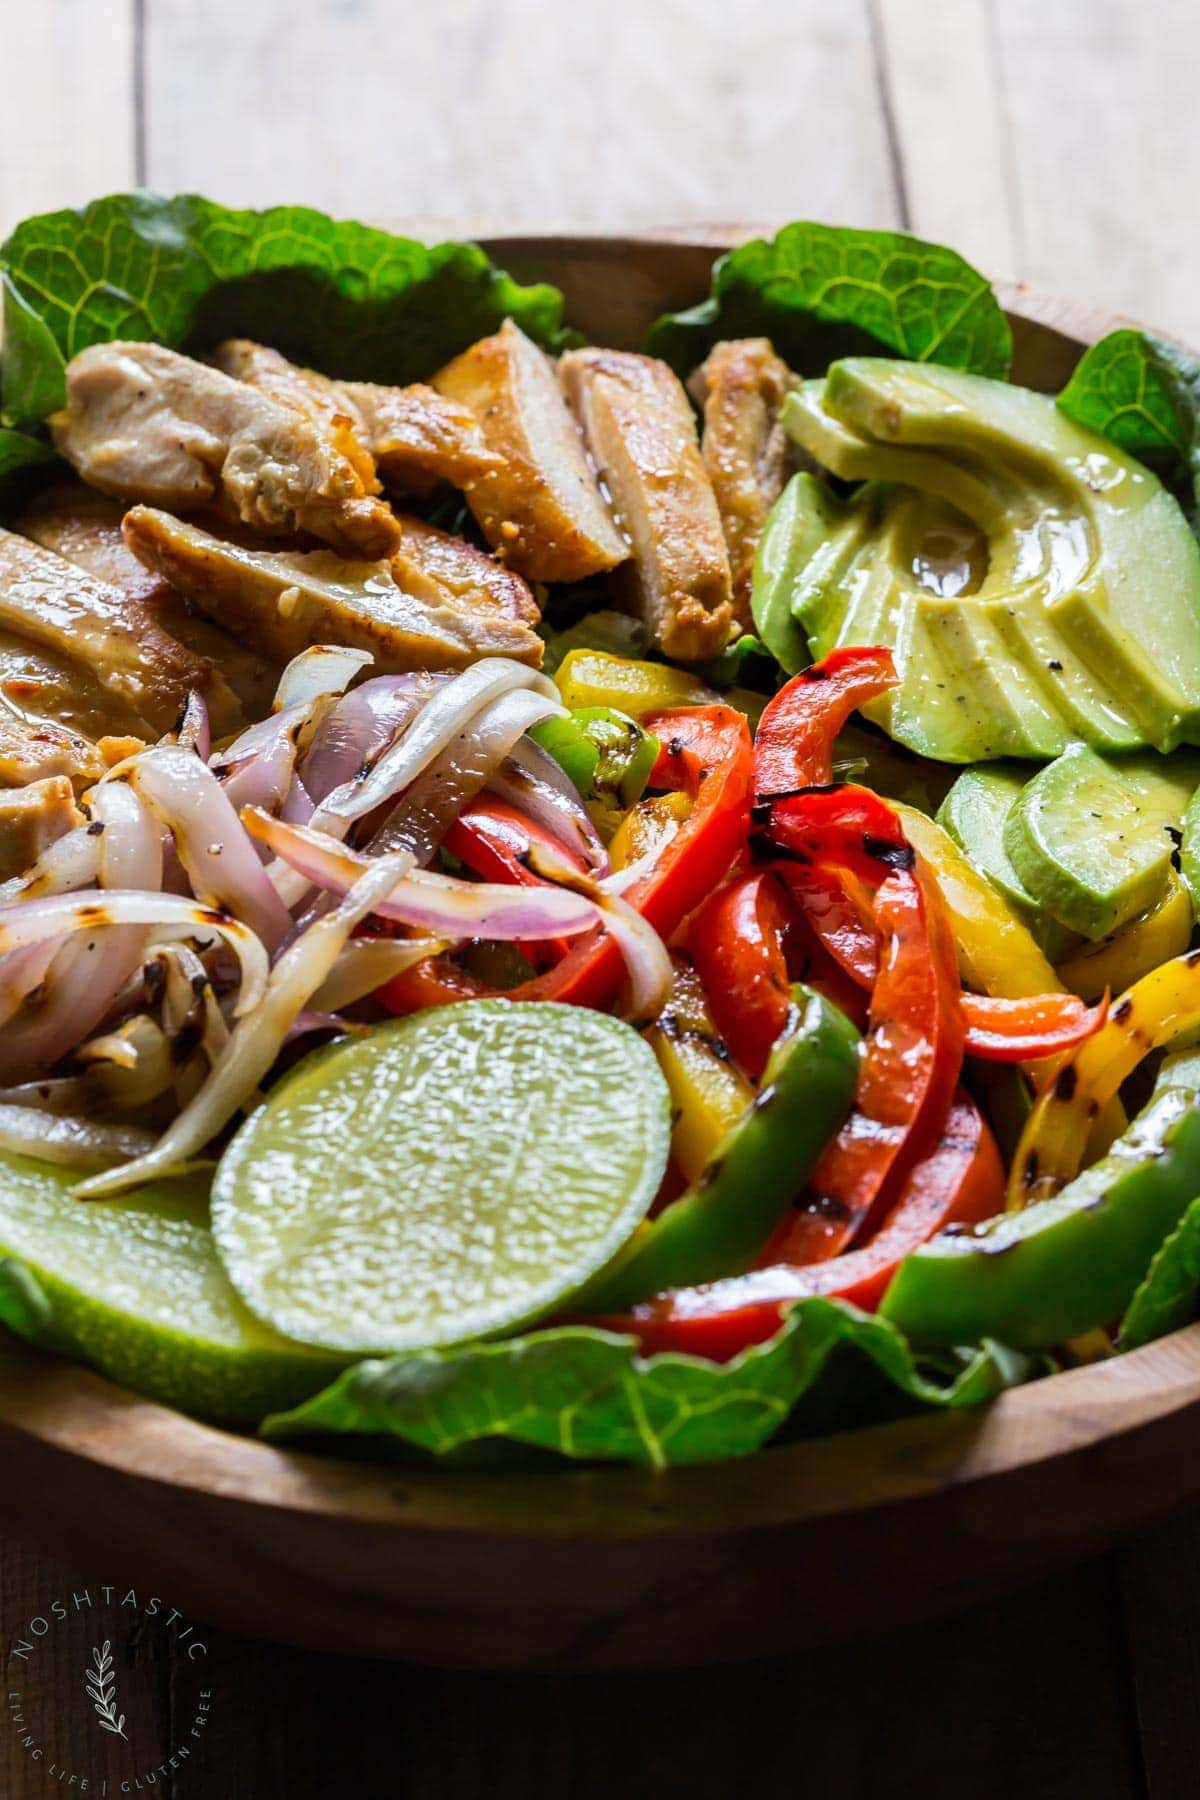 My Chicken Fajita Salad has all kinds of tasty ingredients including, grilled marinated fajita chicken, red onions, bell pepper, avocados and is topped with a fabulous honey lime salad dressing.| www.noshtastic.com | #chickenfajitas #chickenfajitasalad #fajitasalad #chickensalad #paleo #paleosalad #paleochicken #healthysalad #glutenfree #noshtastic #glutenfreerecipe 